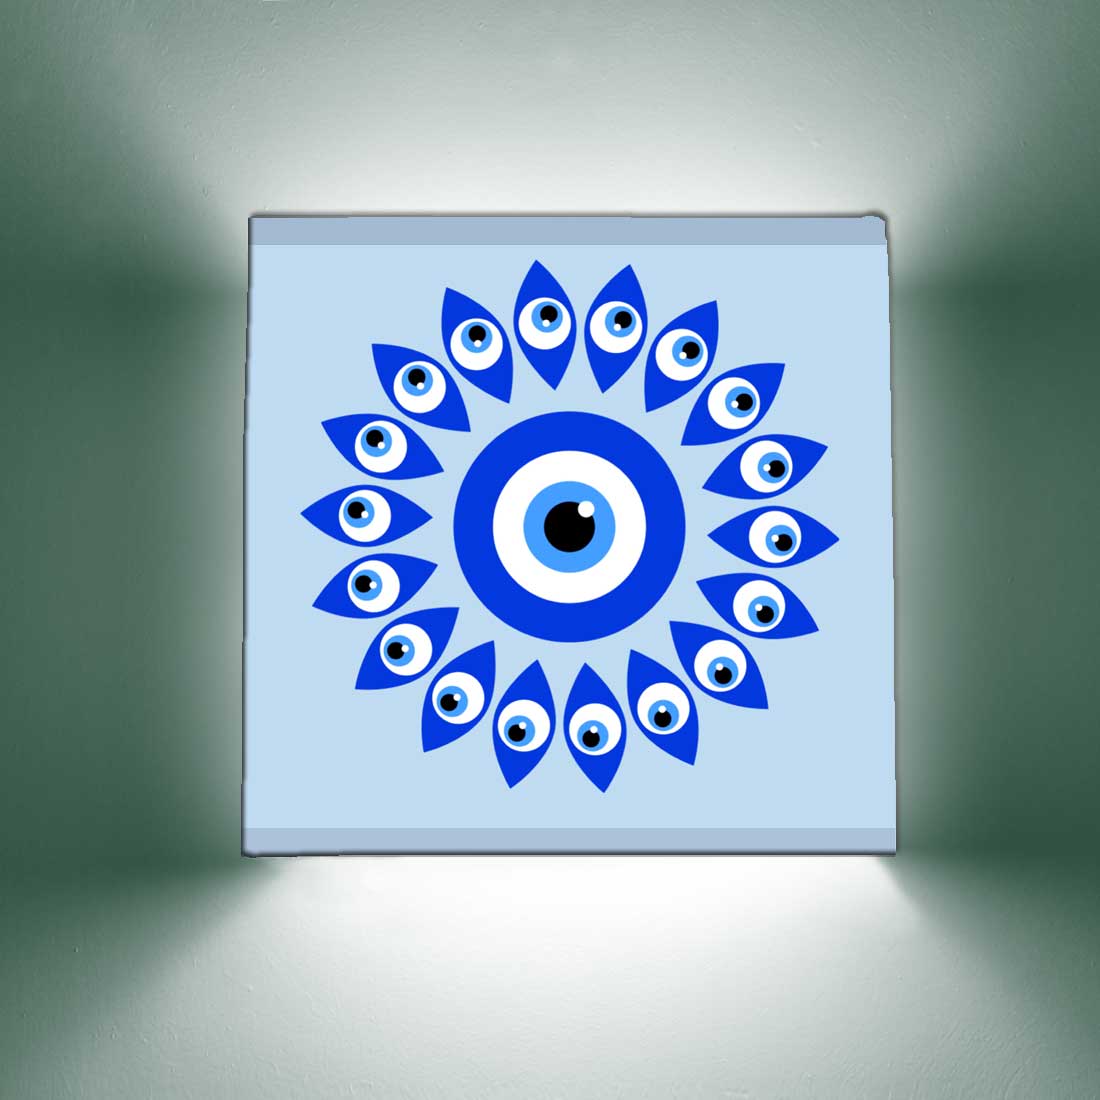 Square Wall Mount Night Lamp for Living Room Decor - Evil Eye Protector Nutcase